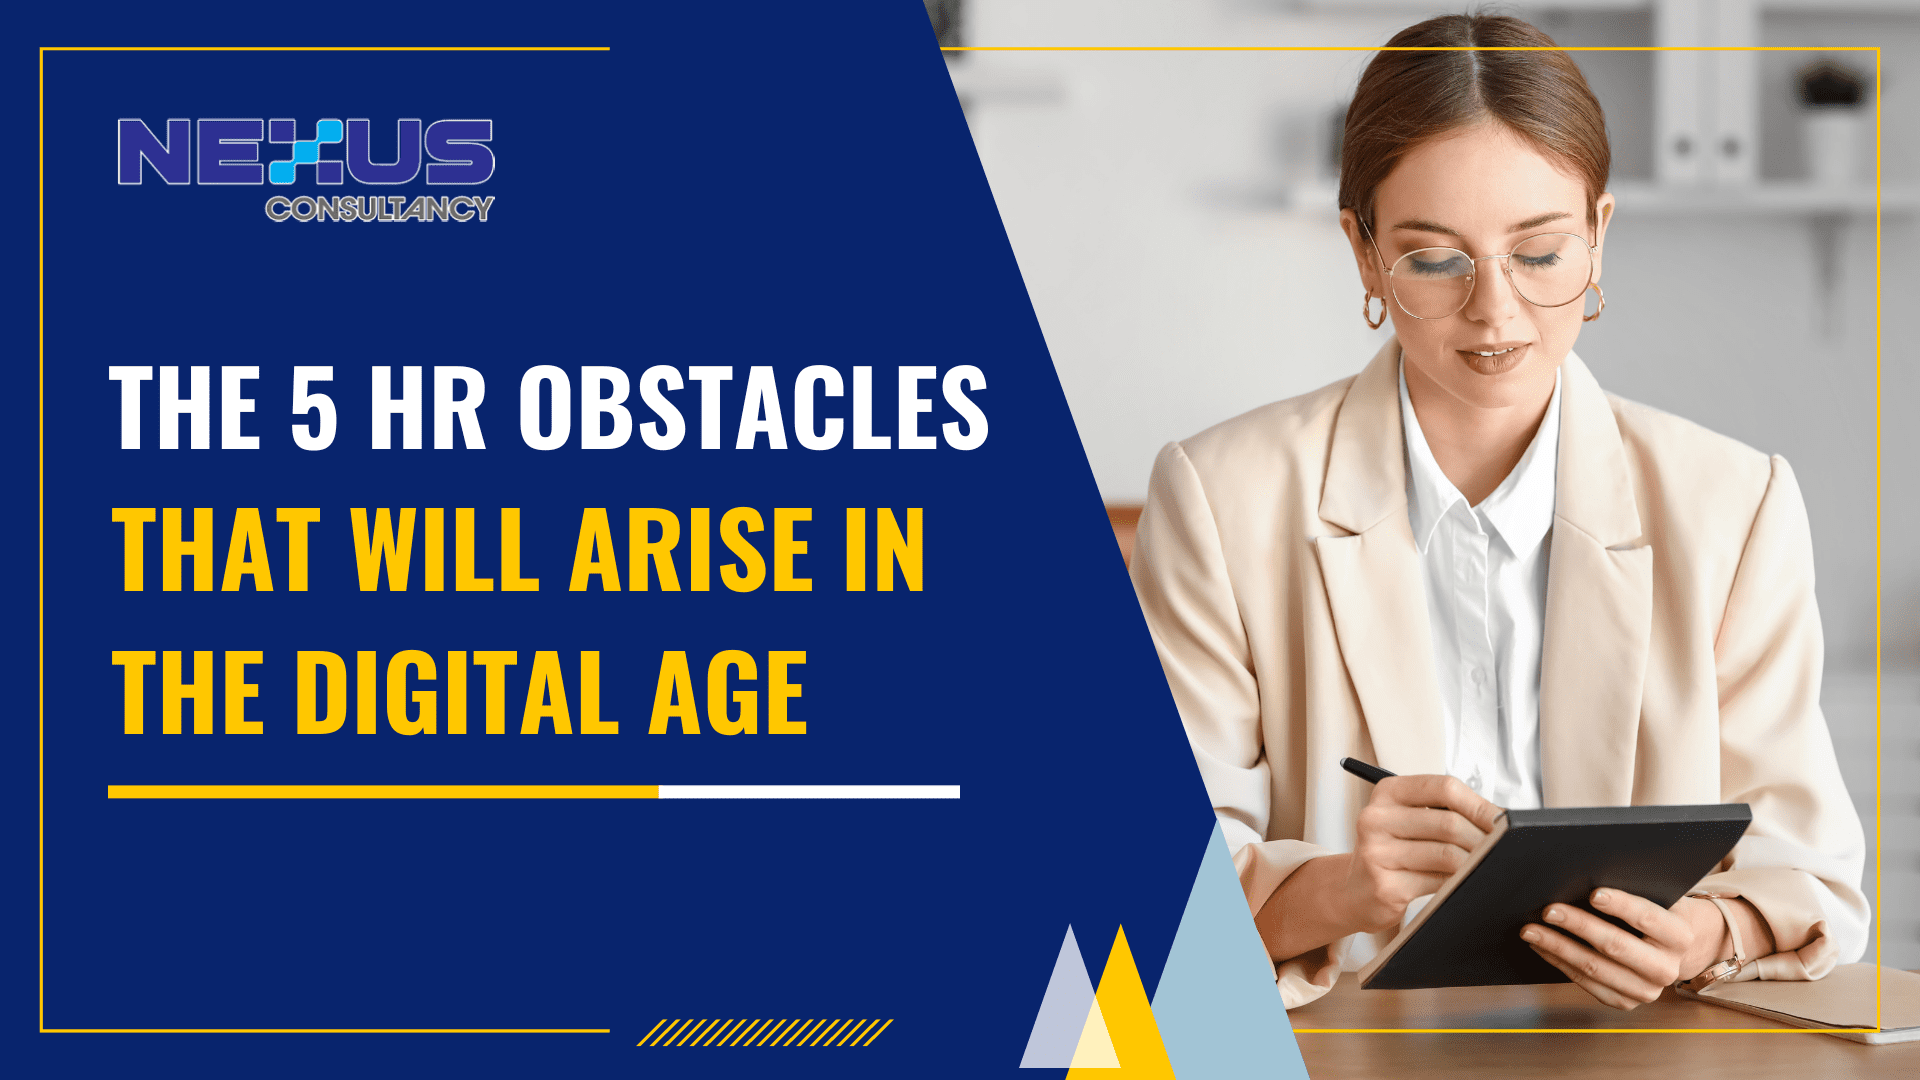 The 5 HR Obstacles That Will Arise in the Digital Age